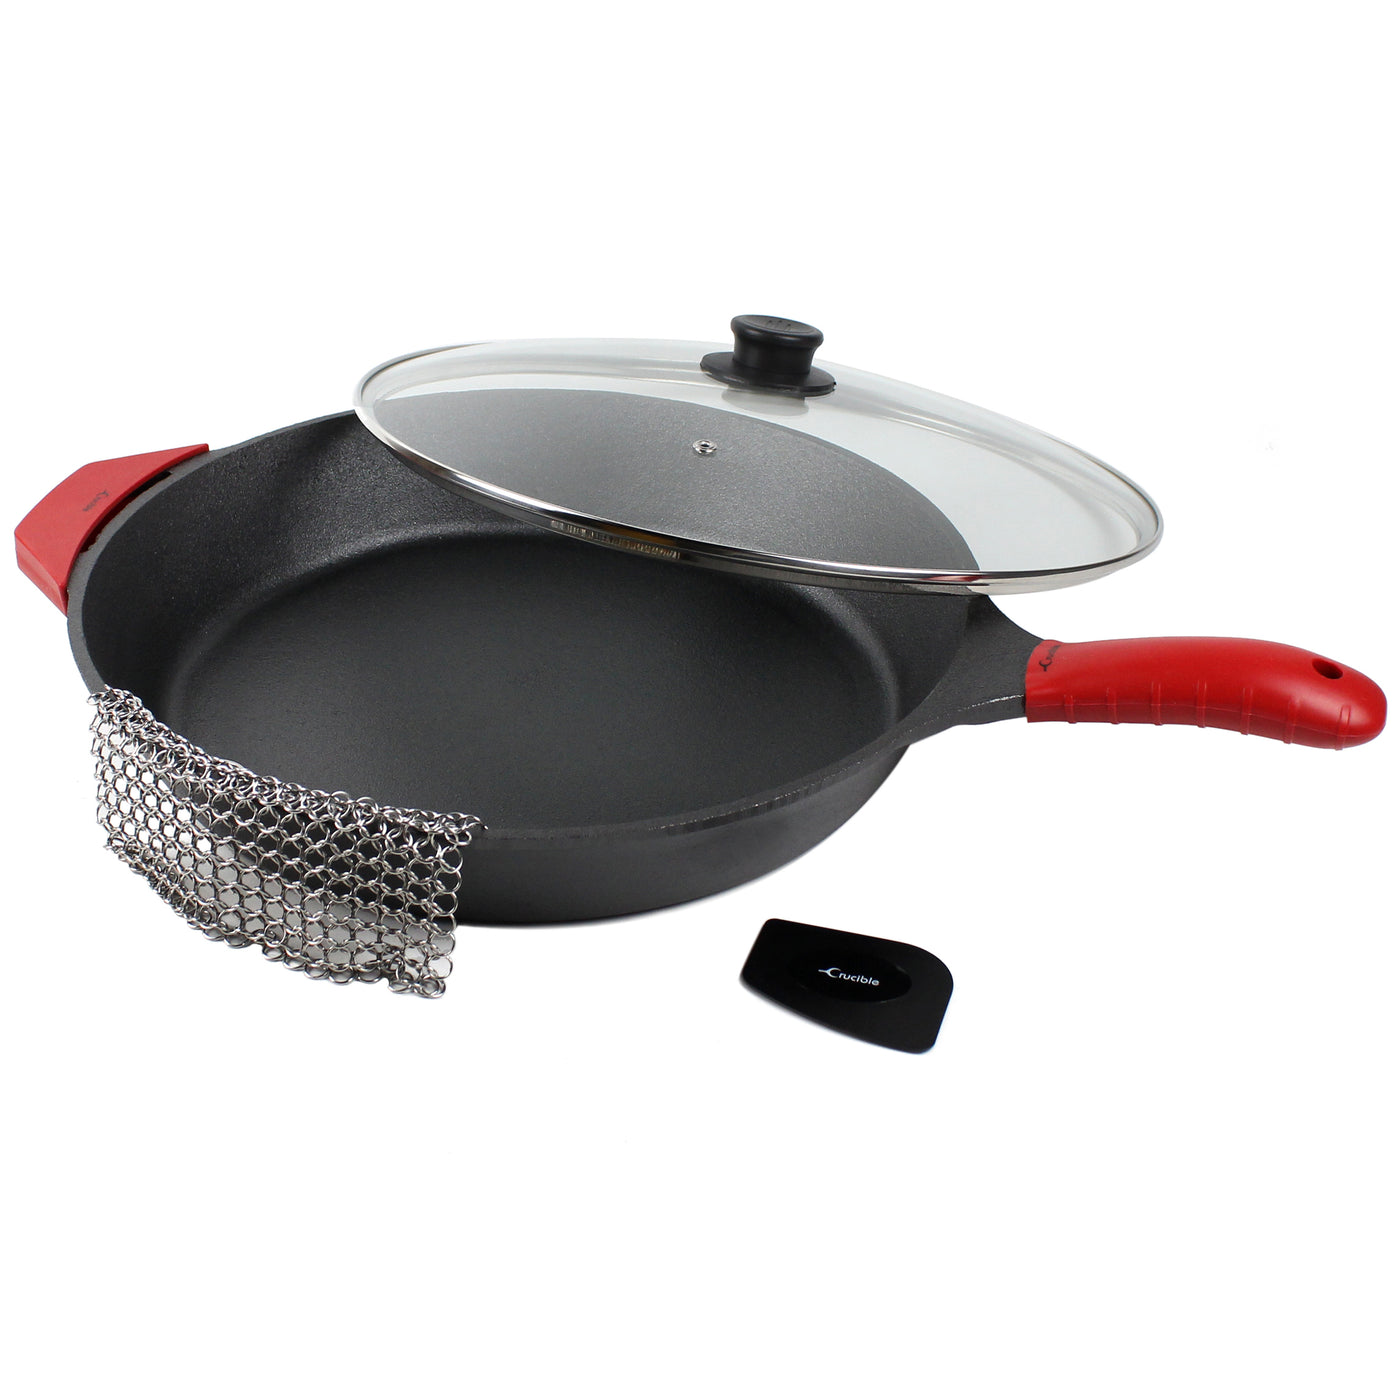 15-Inch (38 cm) Cast Iron Skillet Set, Silicone Handle Holders, Glass Lid, Cast Iron Cleaner, Scraper